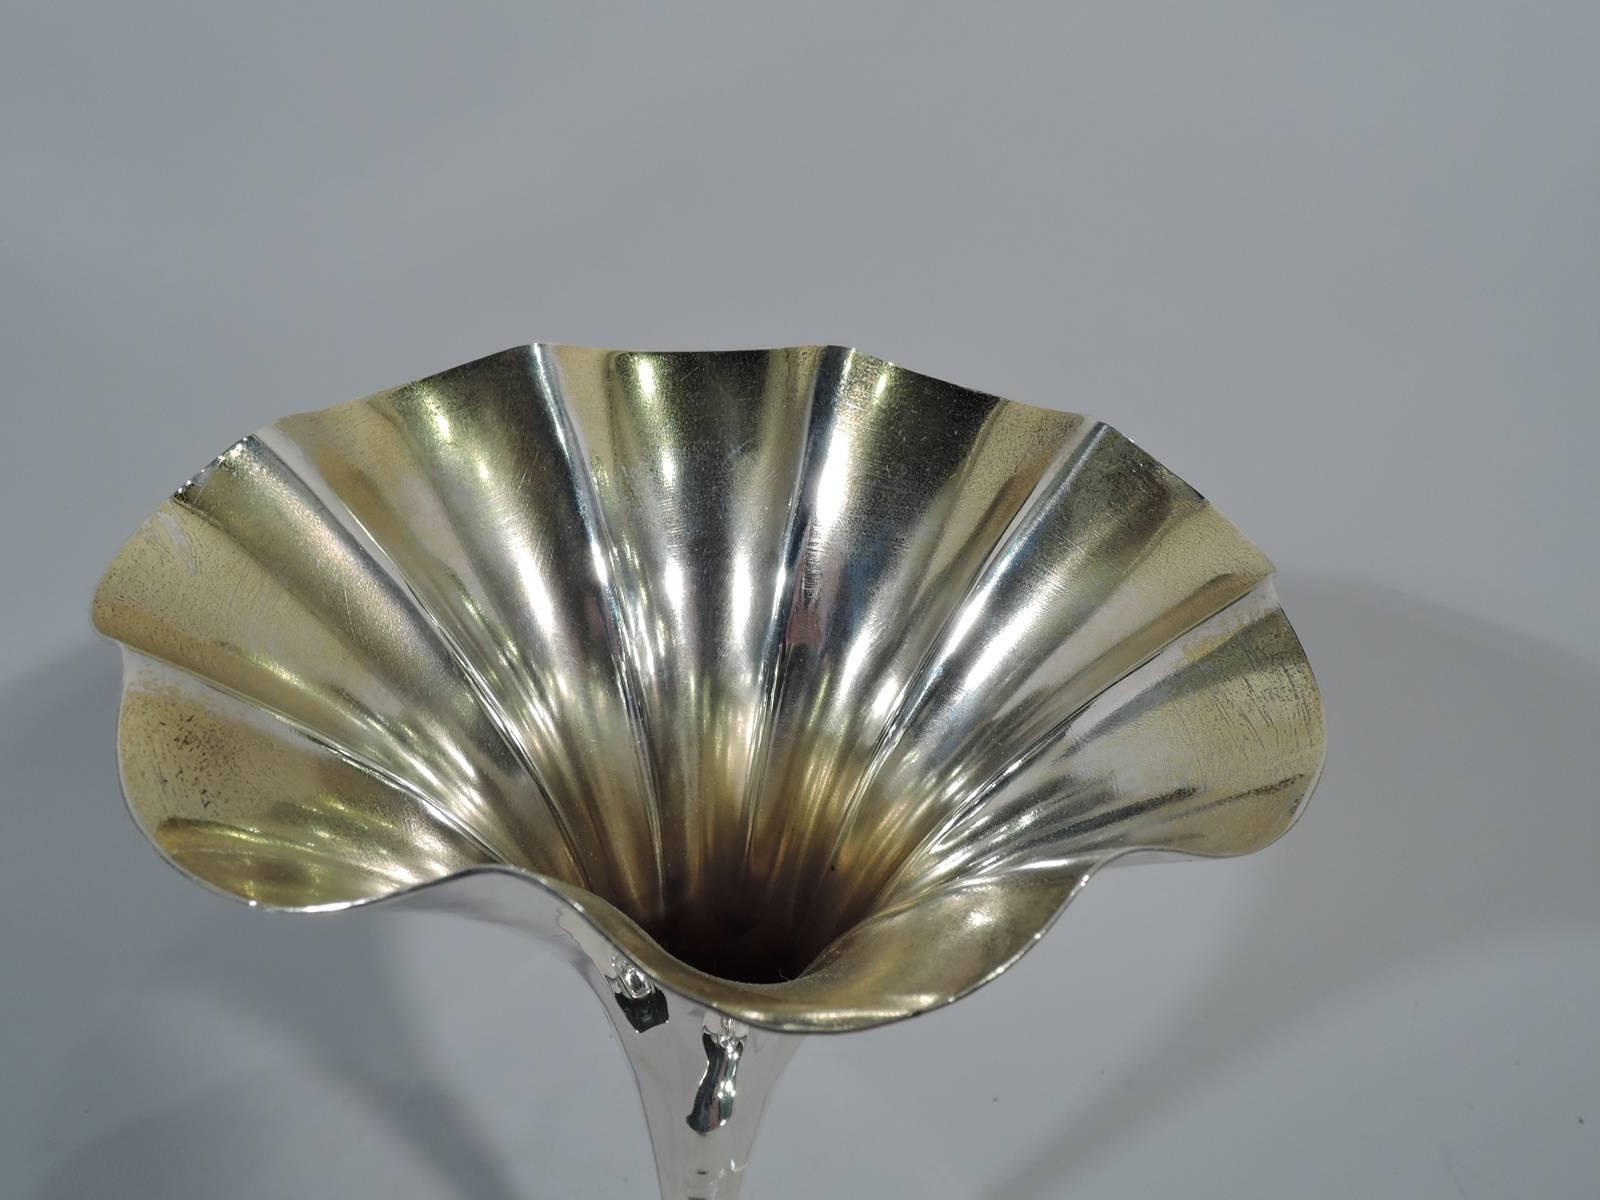 Fancy sterling silver vase. Made by Tiffany & Co. in New York, circa 1910. Elongated cone on small dome set in flat circular foot. Chased gadroons and applied beads. Interior lightly gilt. Hallmark includes pattern no. 11908 and director’s letter m